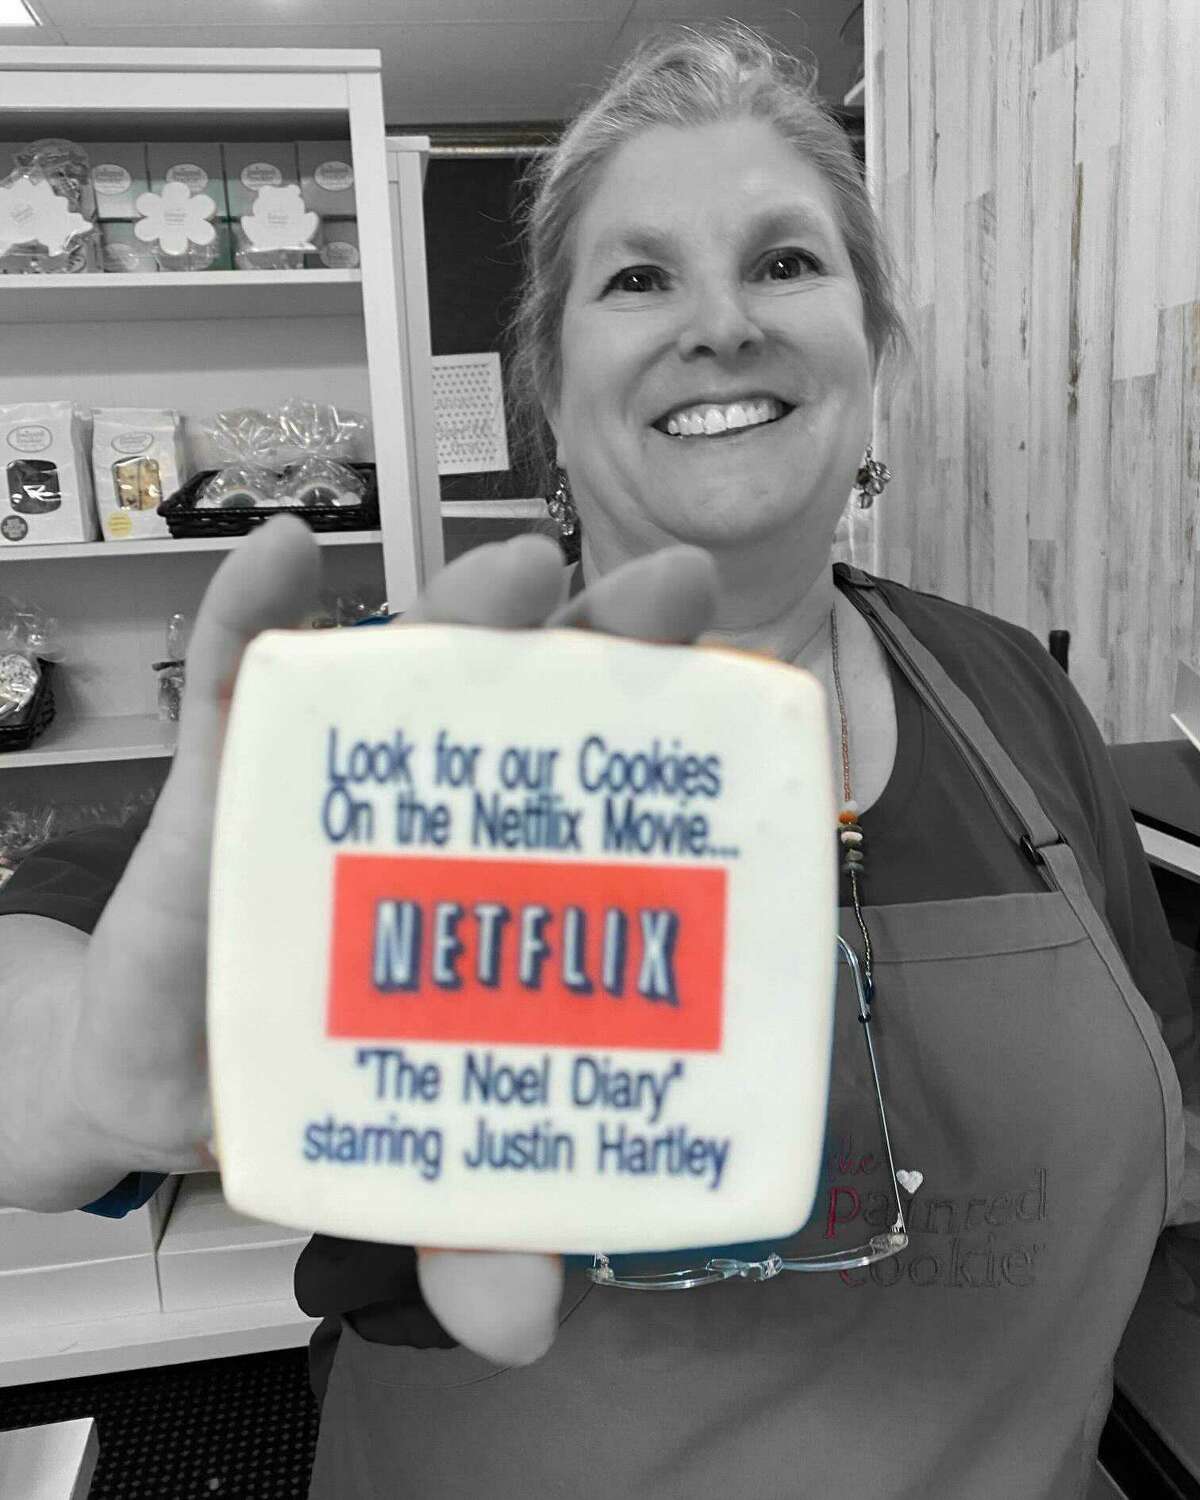 And speaking of "The Noel Diary," Wilton cookie shop The Painted Cookie was contacted to get in on the movie making process.  Susan Schmitt, owner of The Painted Cookie, said that the film’s prop manager reached out to her saying the shop “came highly recommended.” Schmitt shared her work for Netflix on The Painted Cookie’s Instagram account, saying her Christmas sprinkle cookies and gingerbread men were used in a scene with “Die Hard” actress Bonnie Bedelia. 